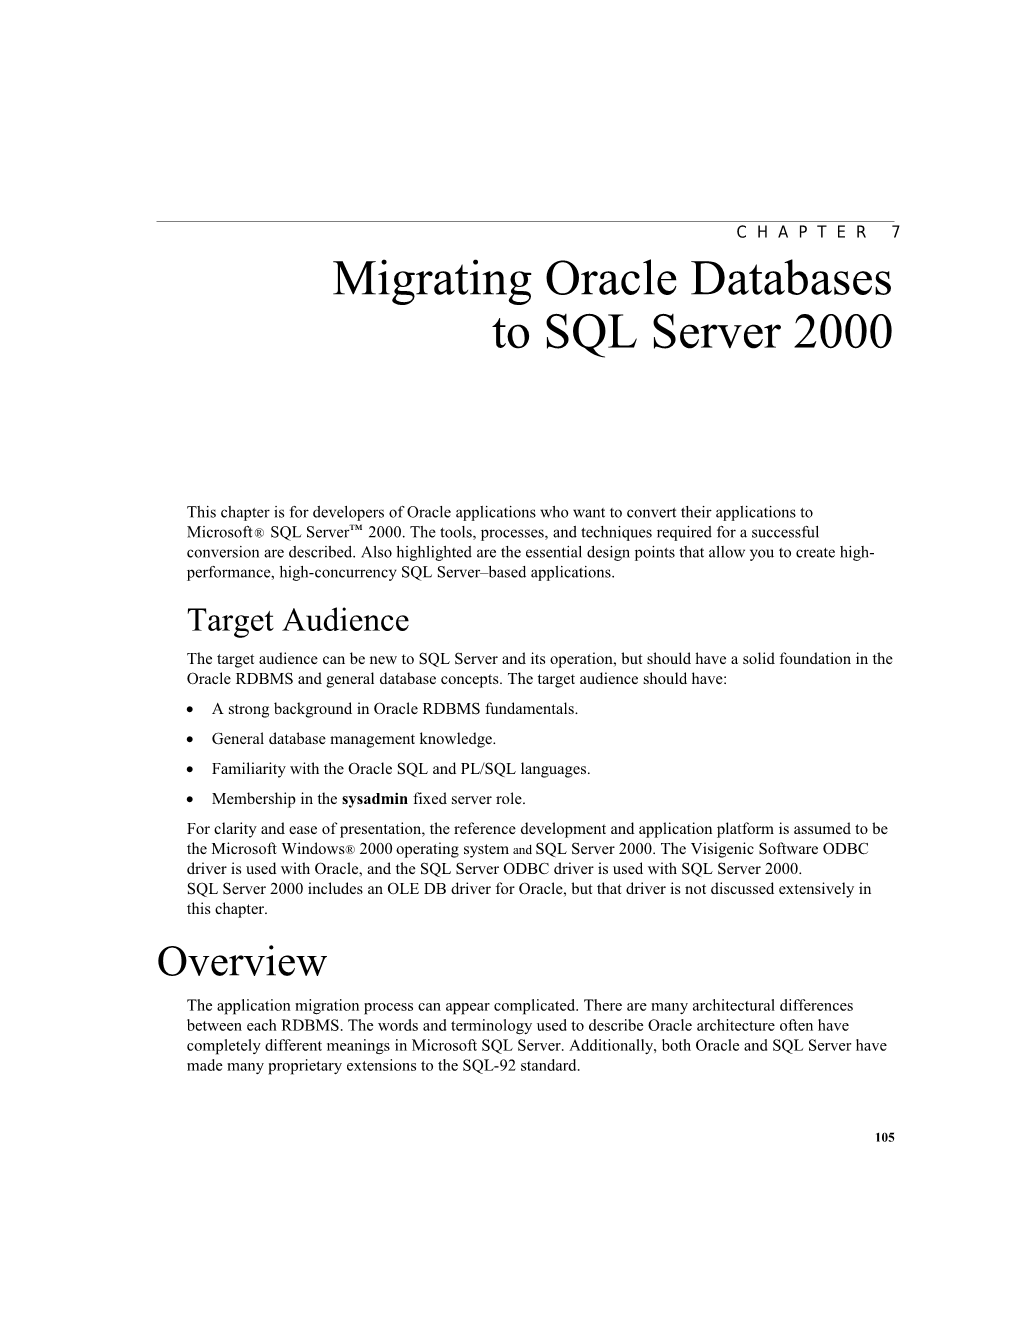 Chapter 7Migrating Oracle Databases to SQL Server 2000